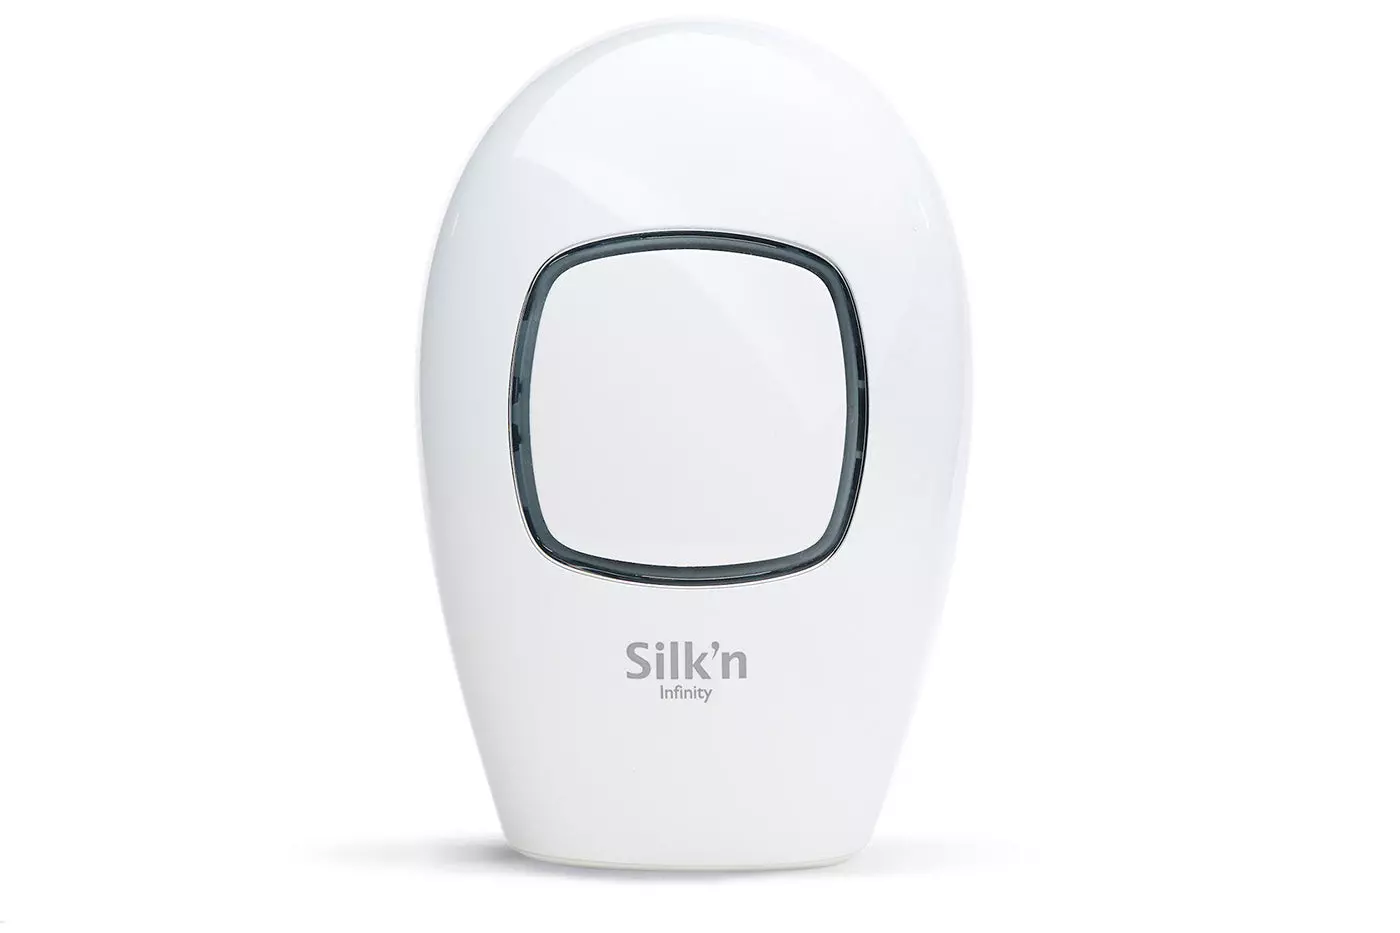 Silk?n Infinity - At Home Permanent Hair Removal for Women and Men